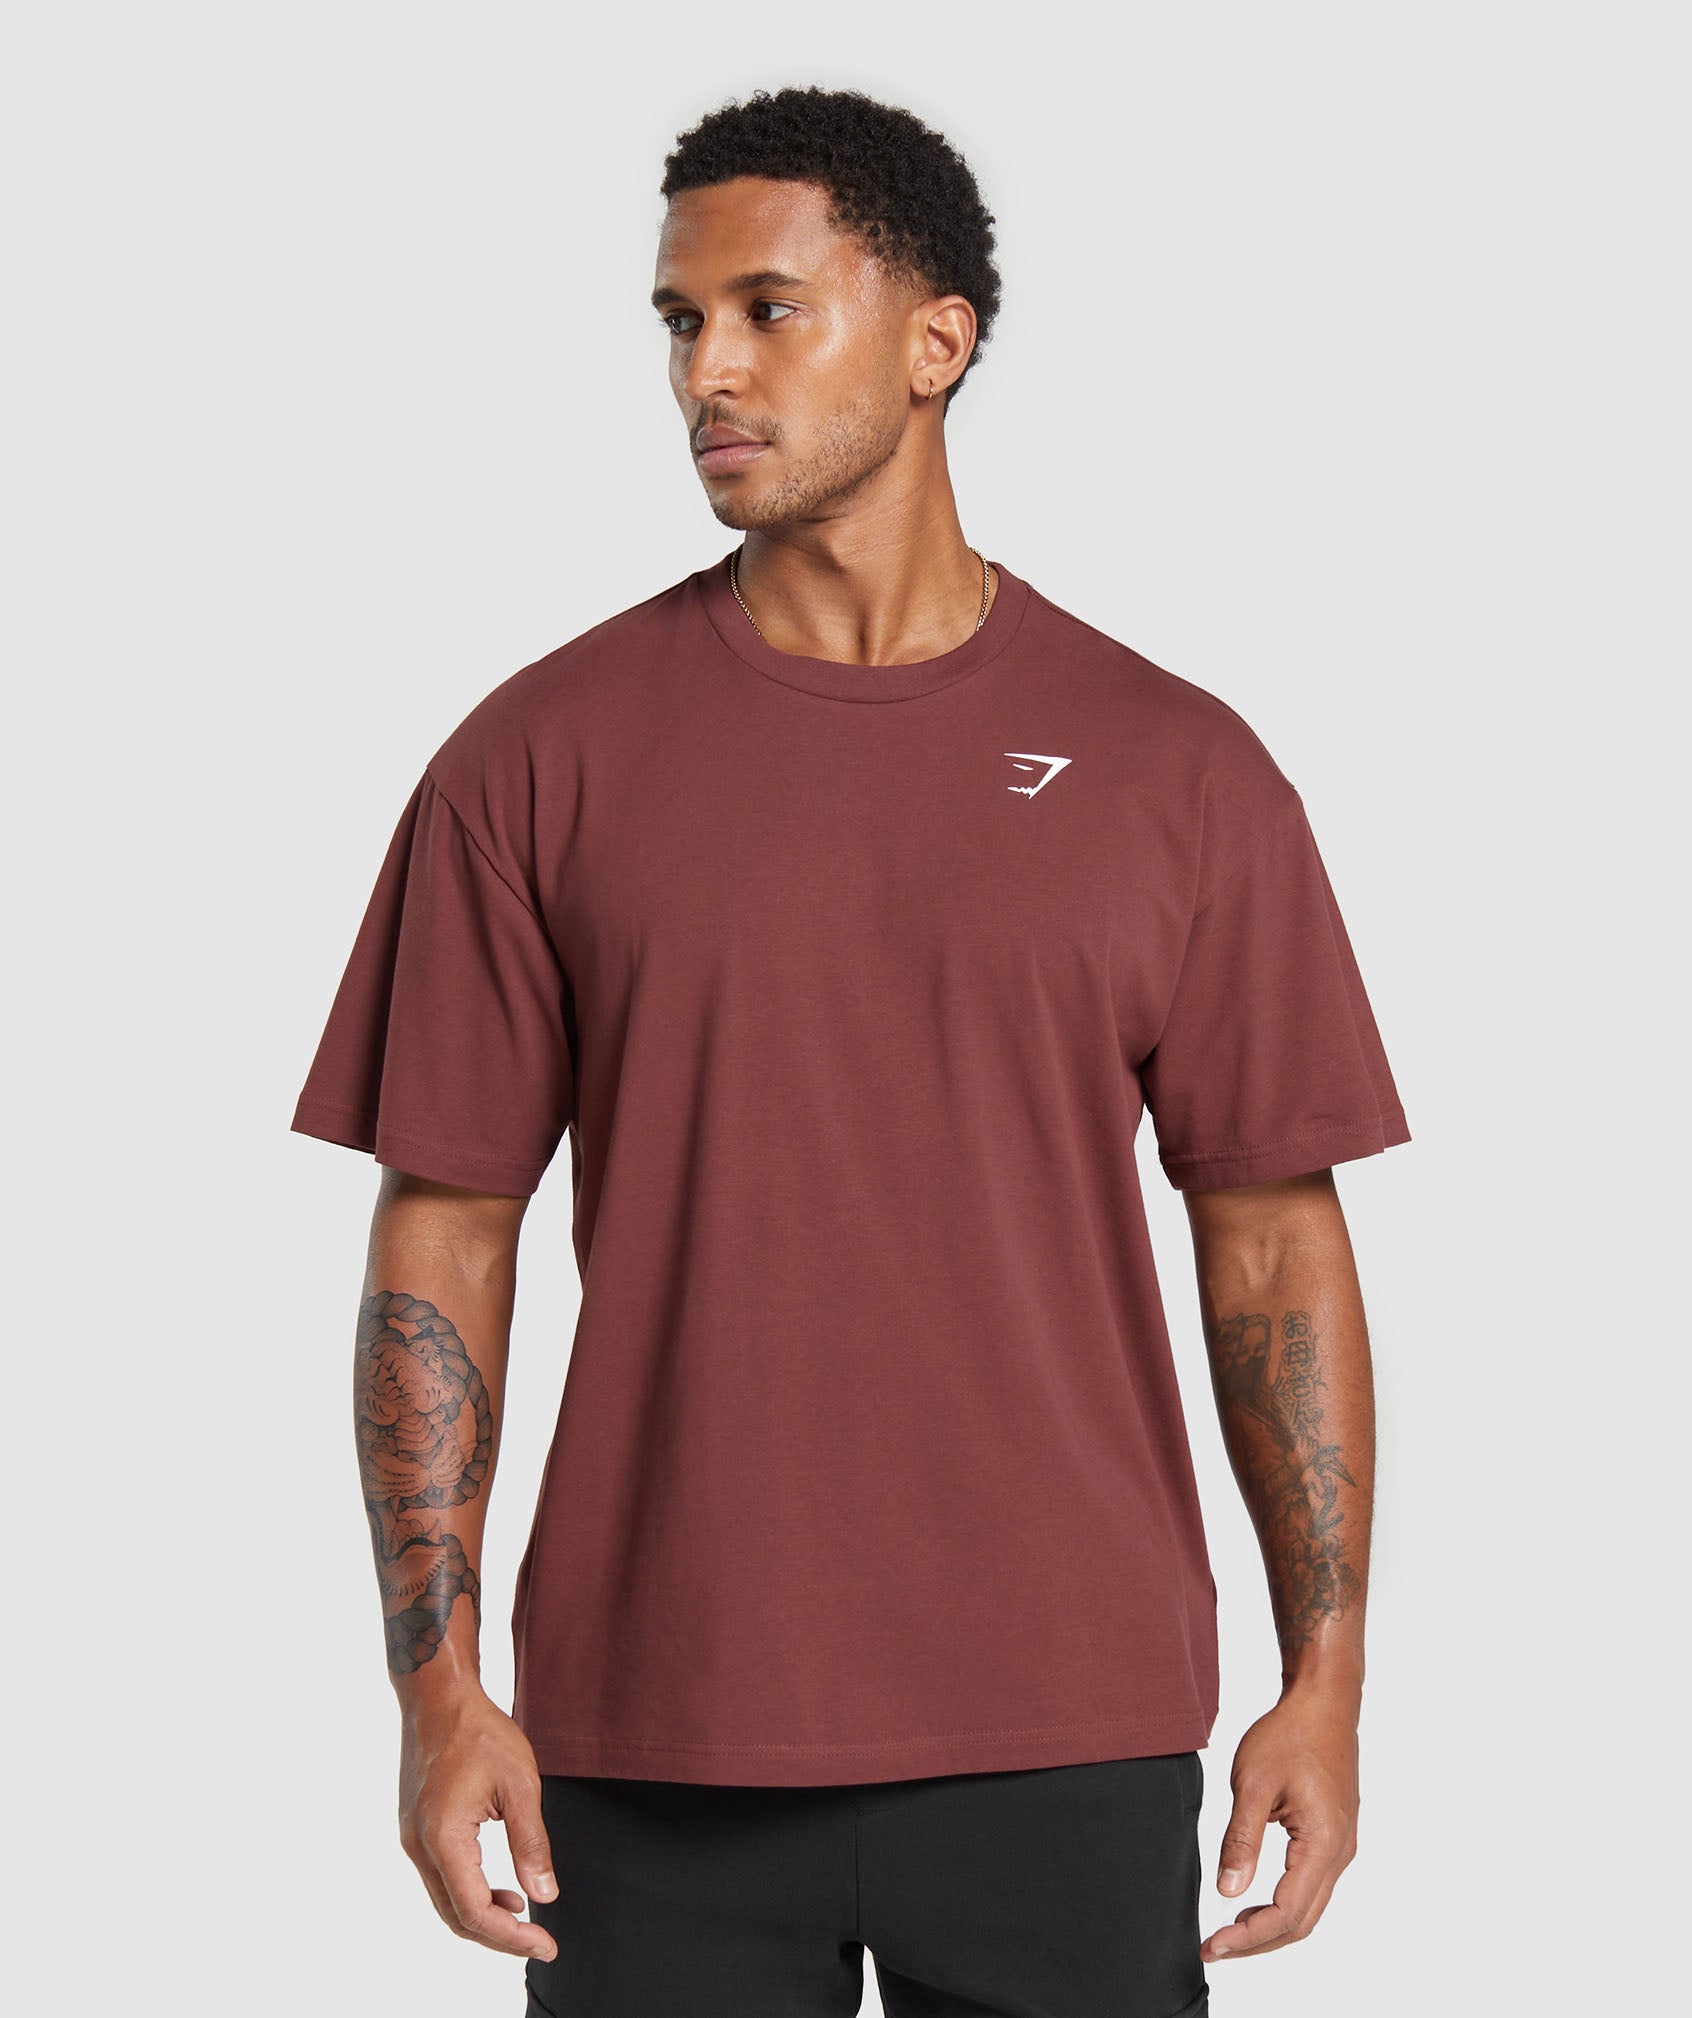 Essential Oversized T-Shirt in Burgundy Brown - view 1